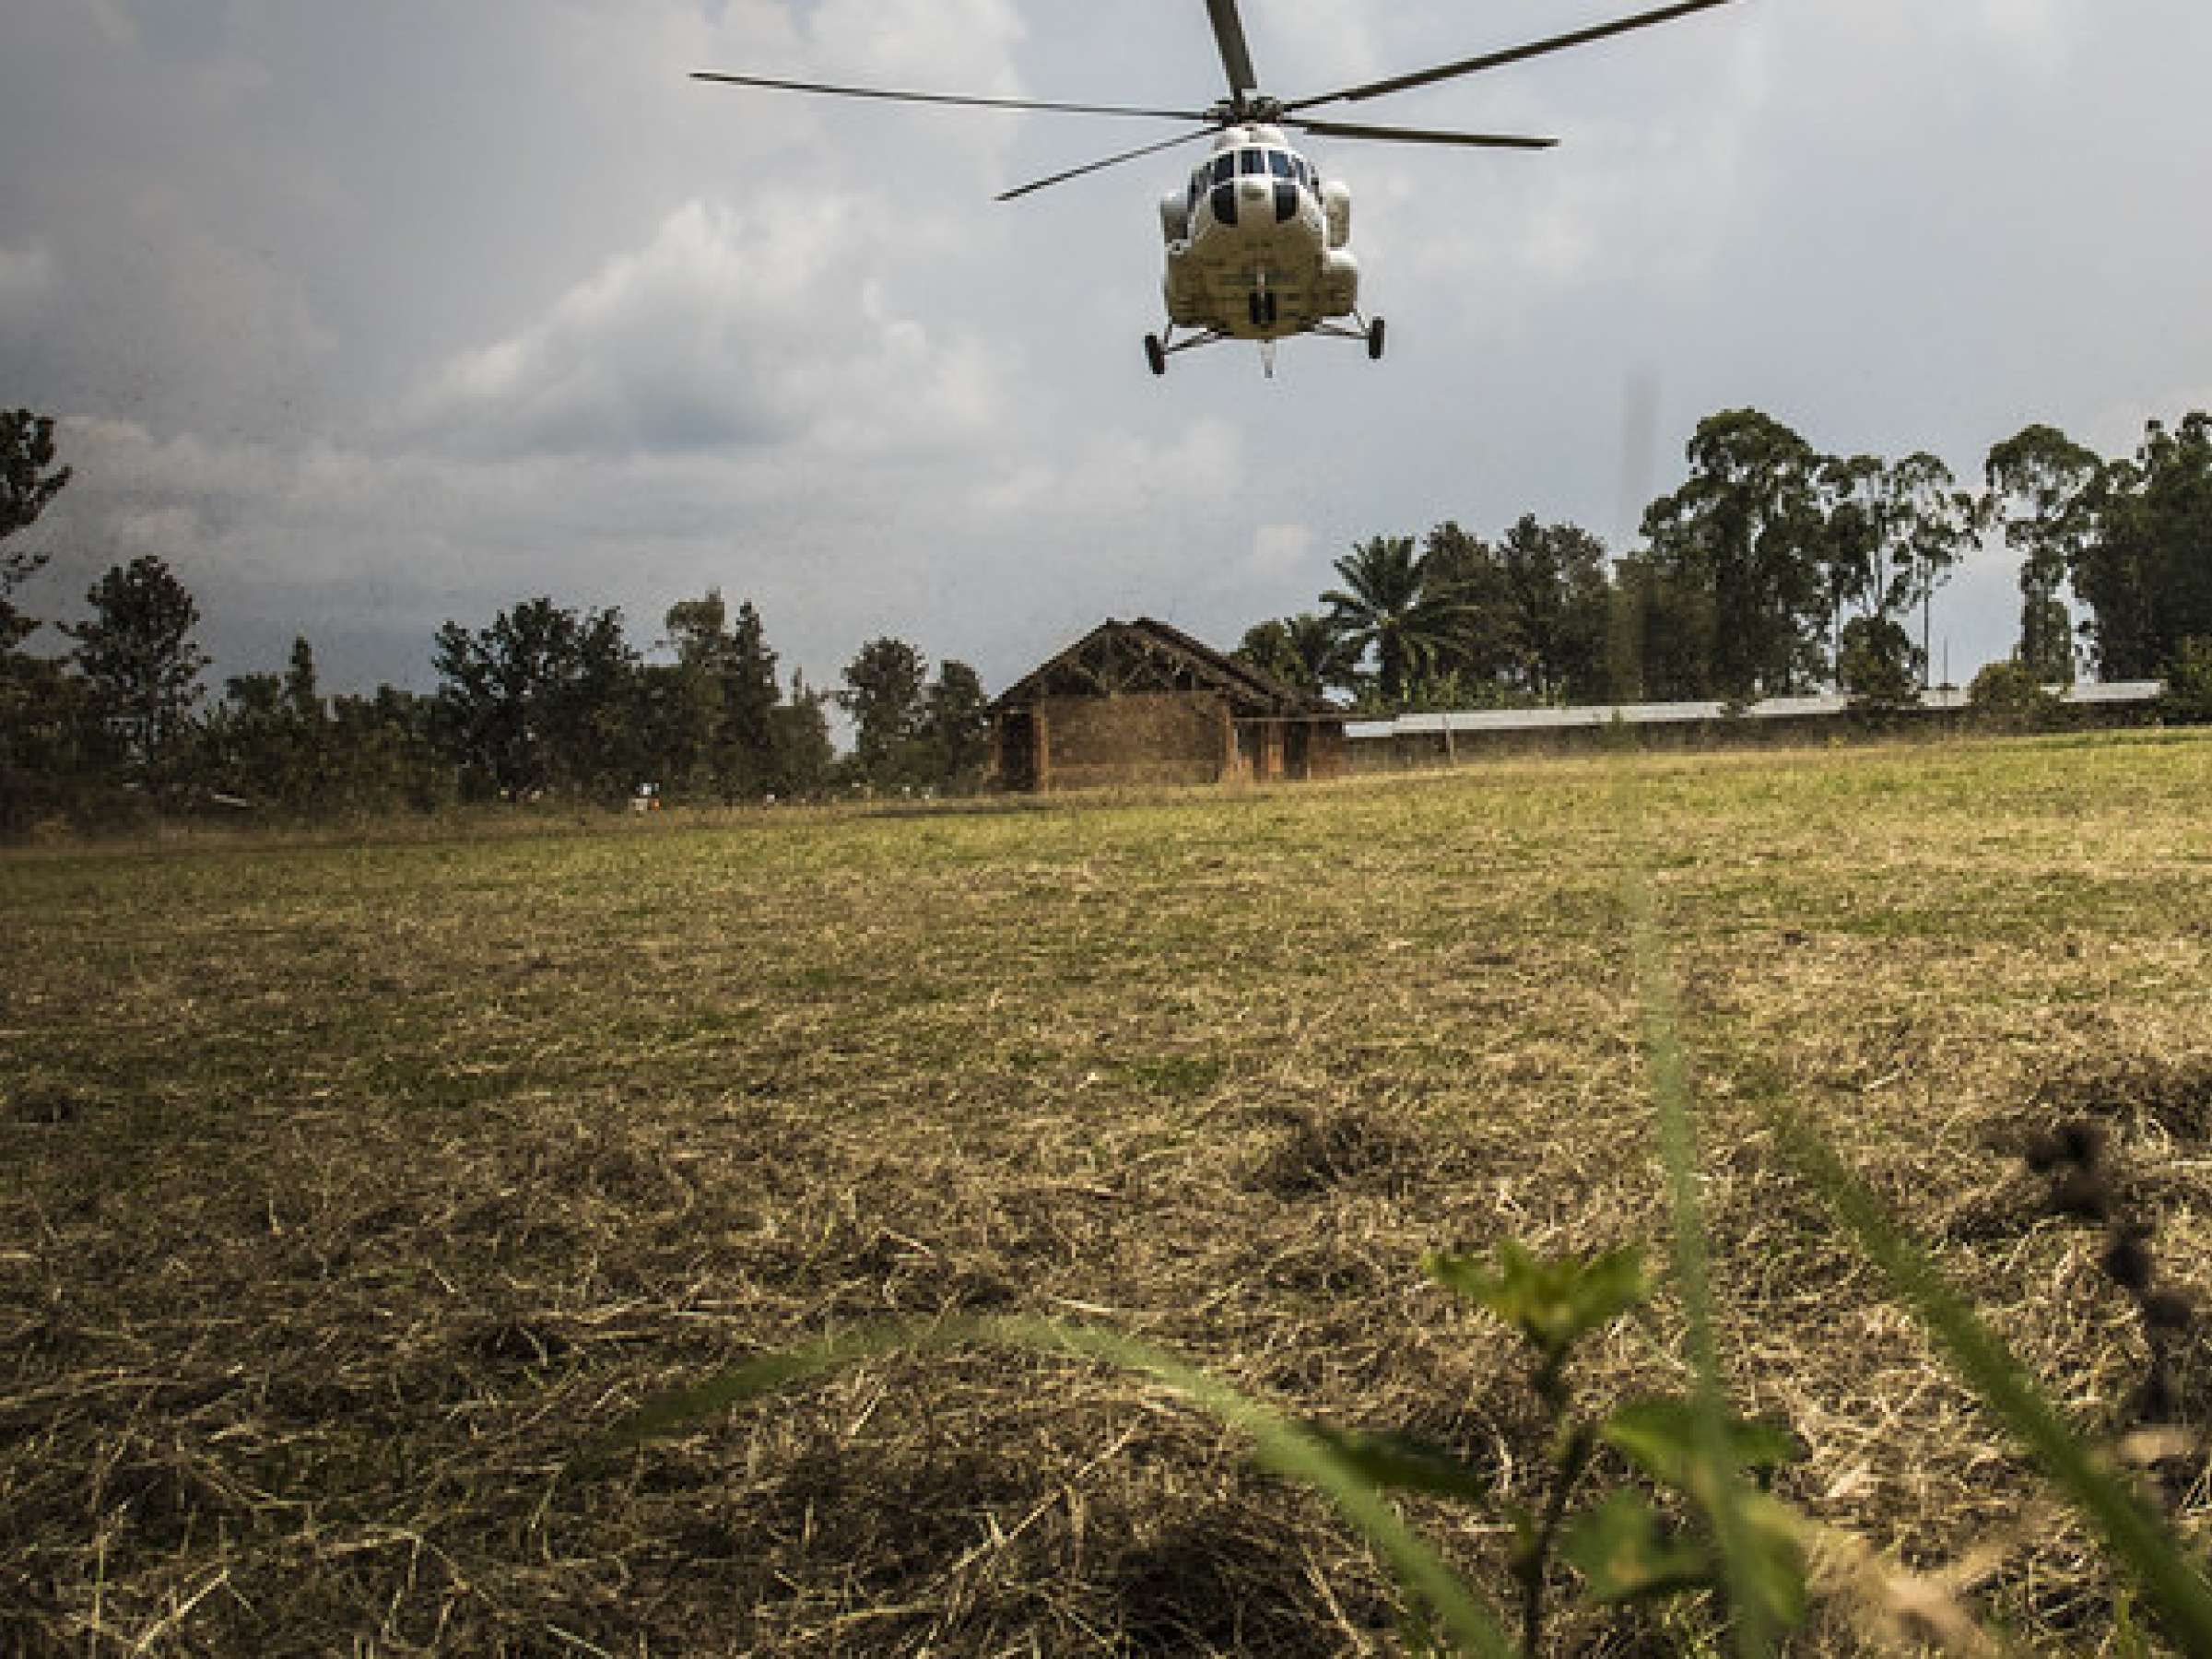 DRC: A Trip to the Front Lines of the Fight Against Ebola